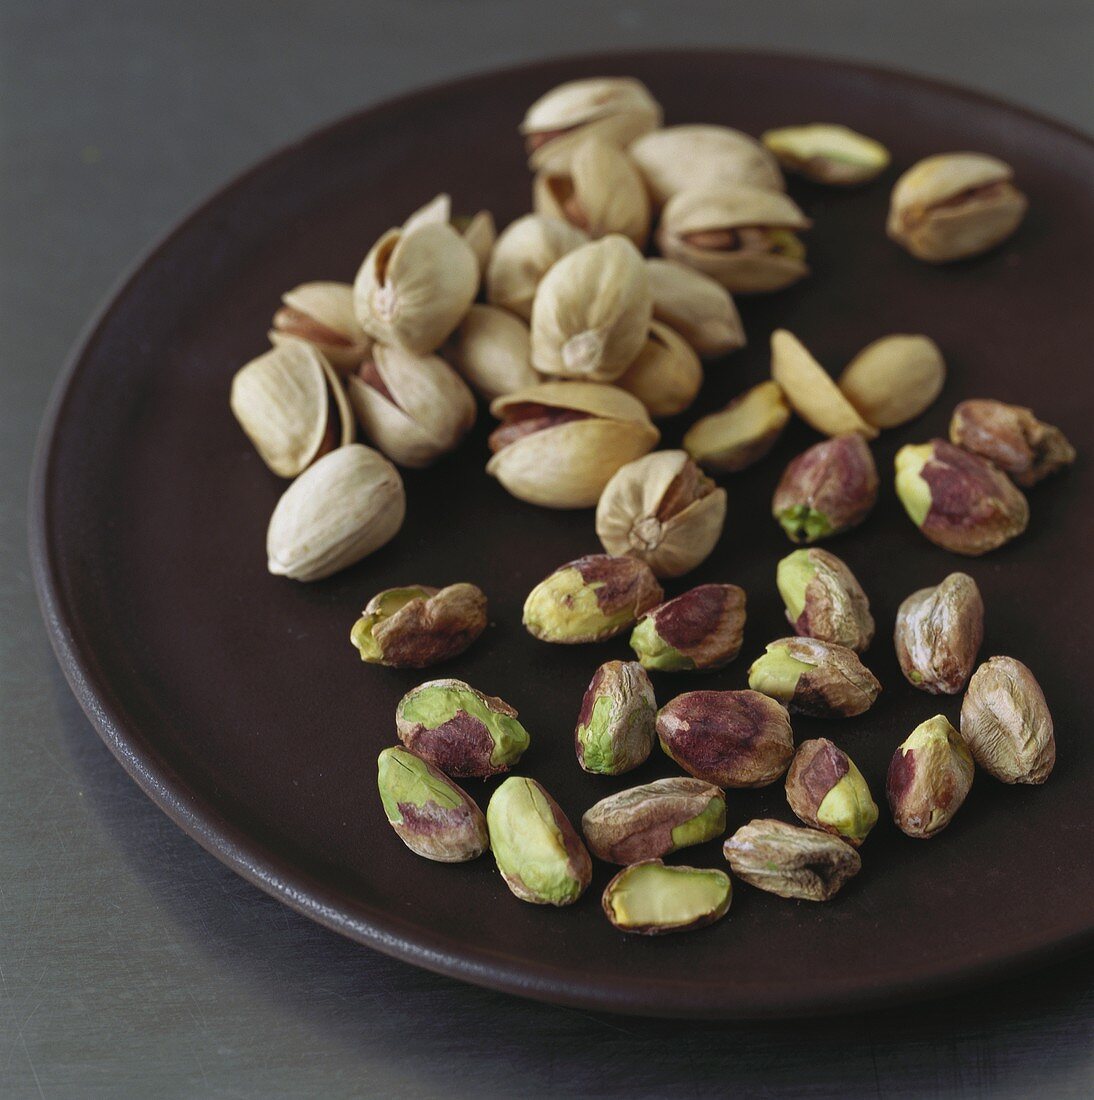 Pistachios, shelled and unshelled